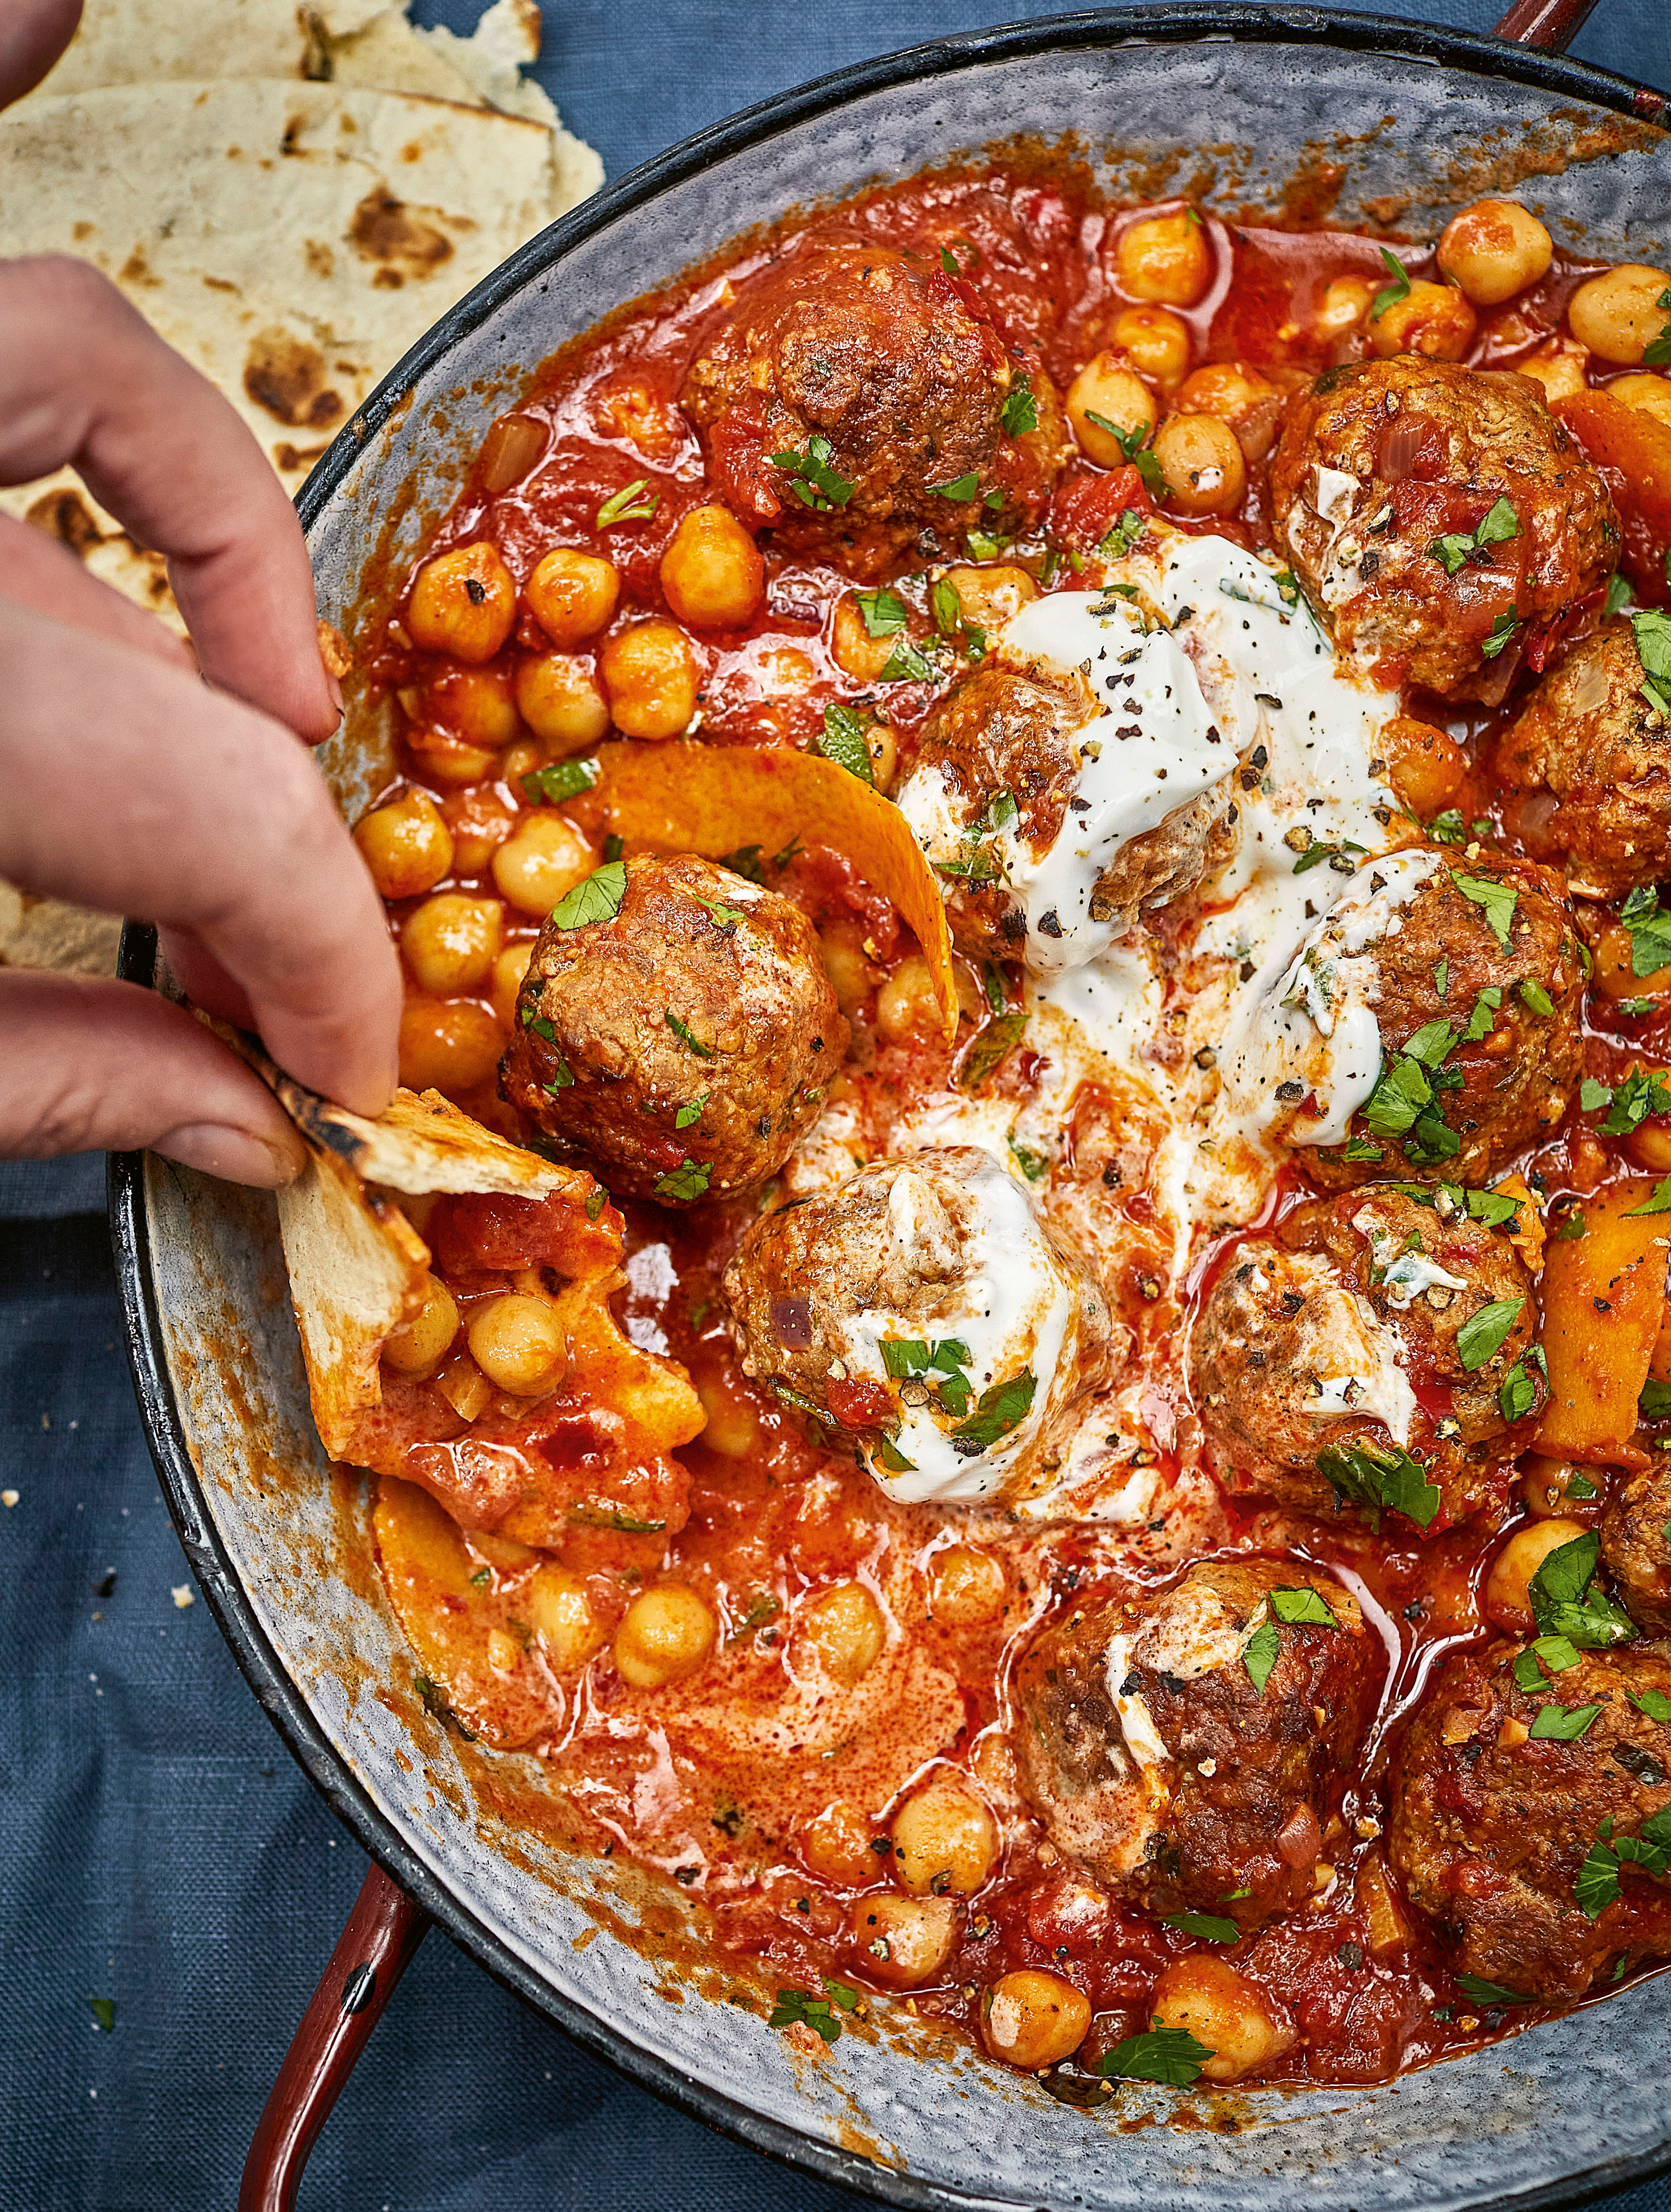 One-pot Moroccan-style meatballs from Home Kitchen 